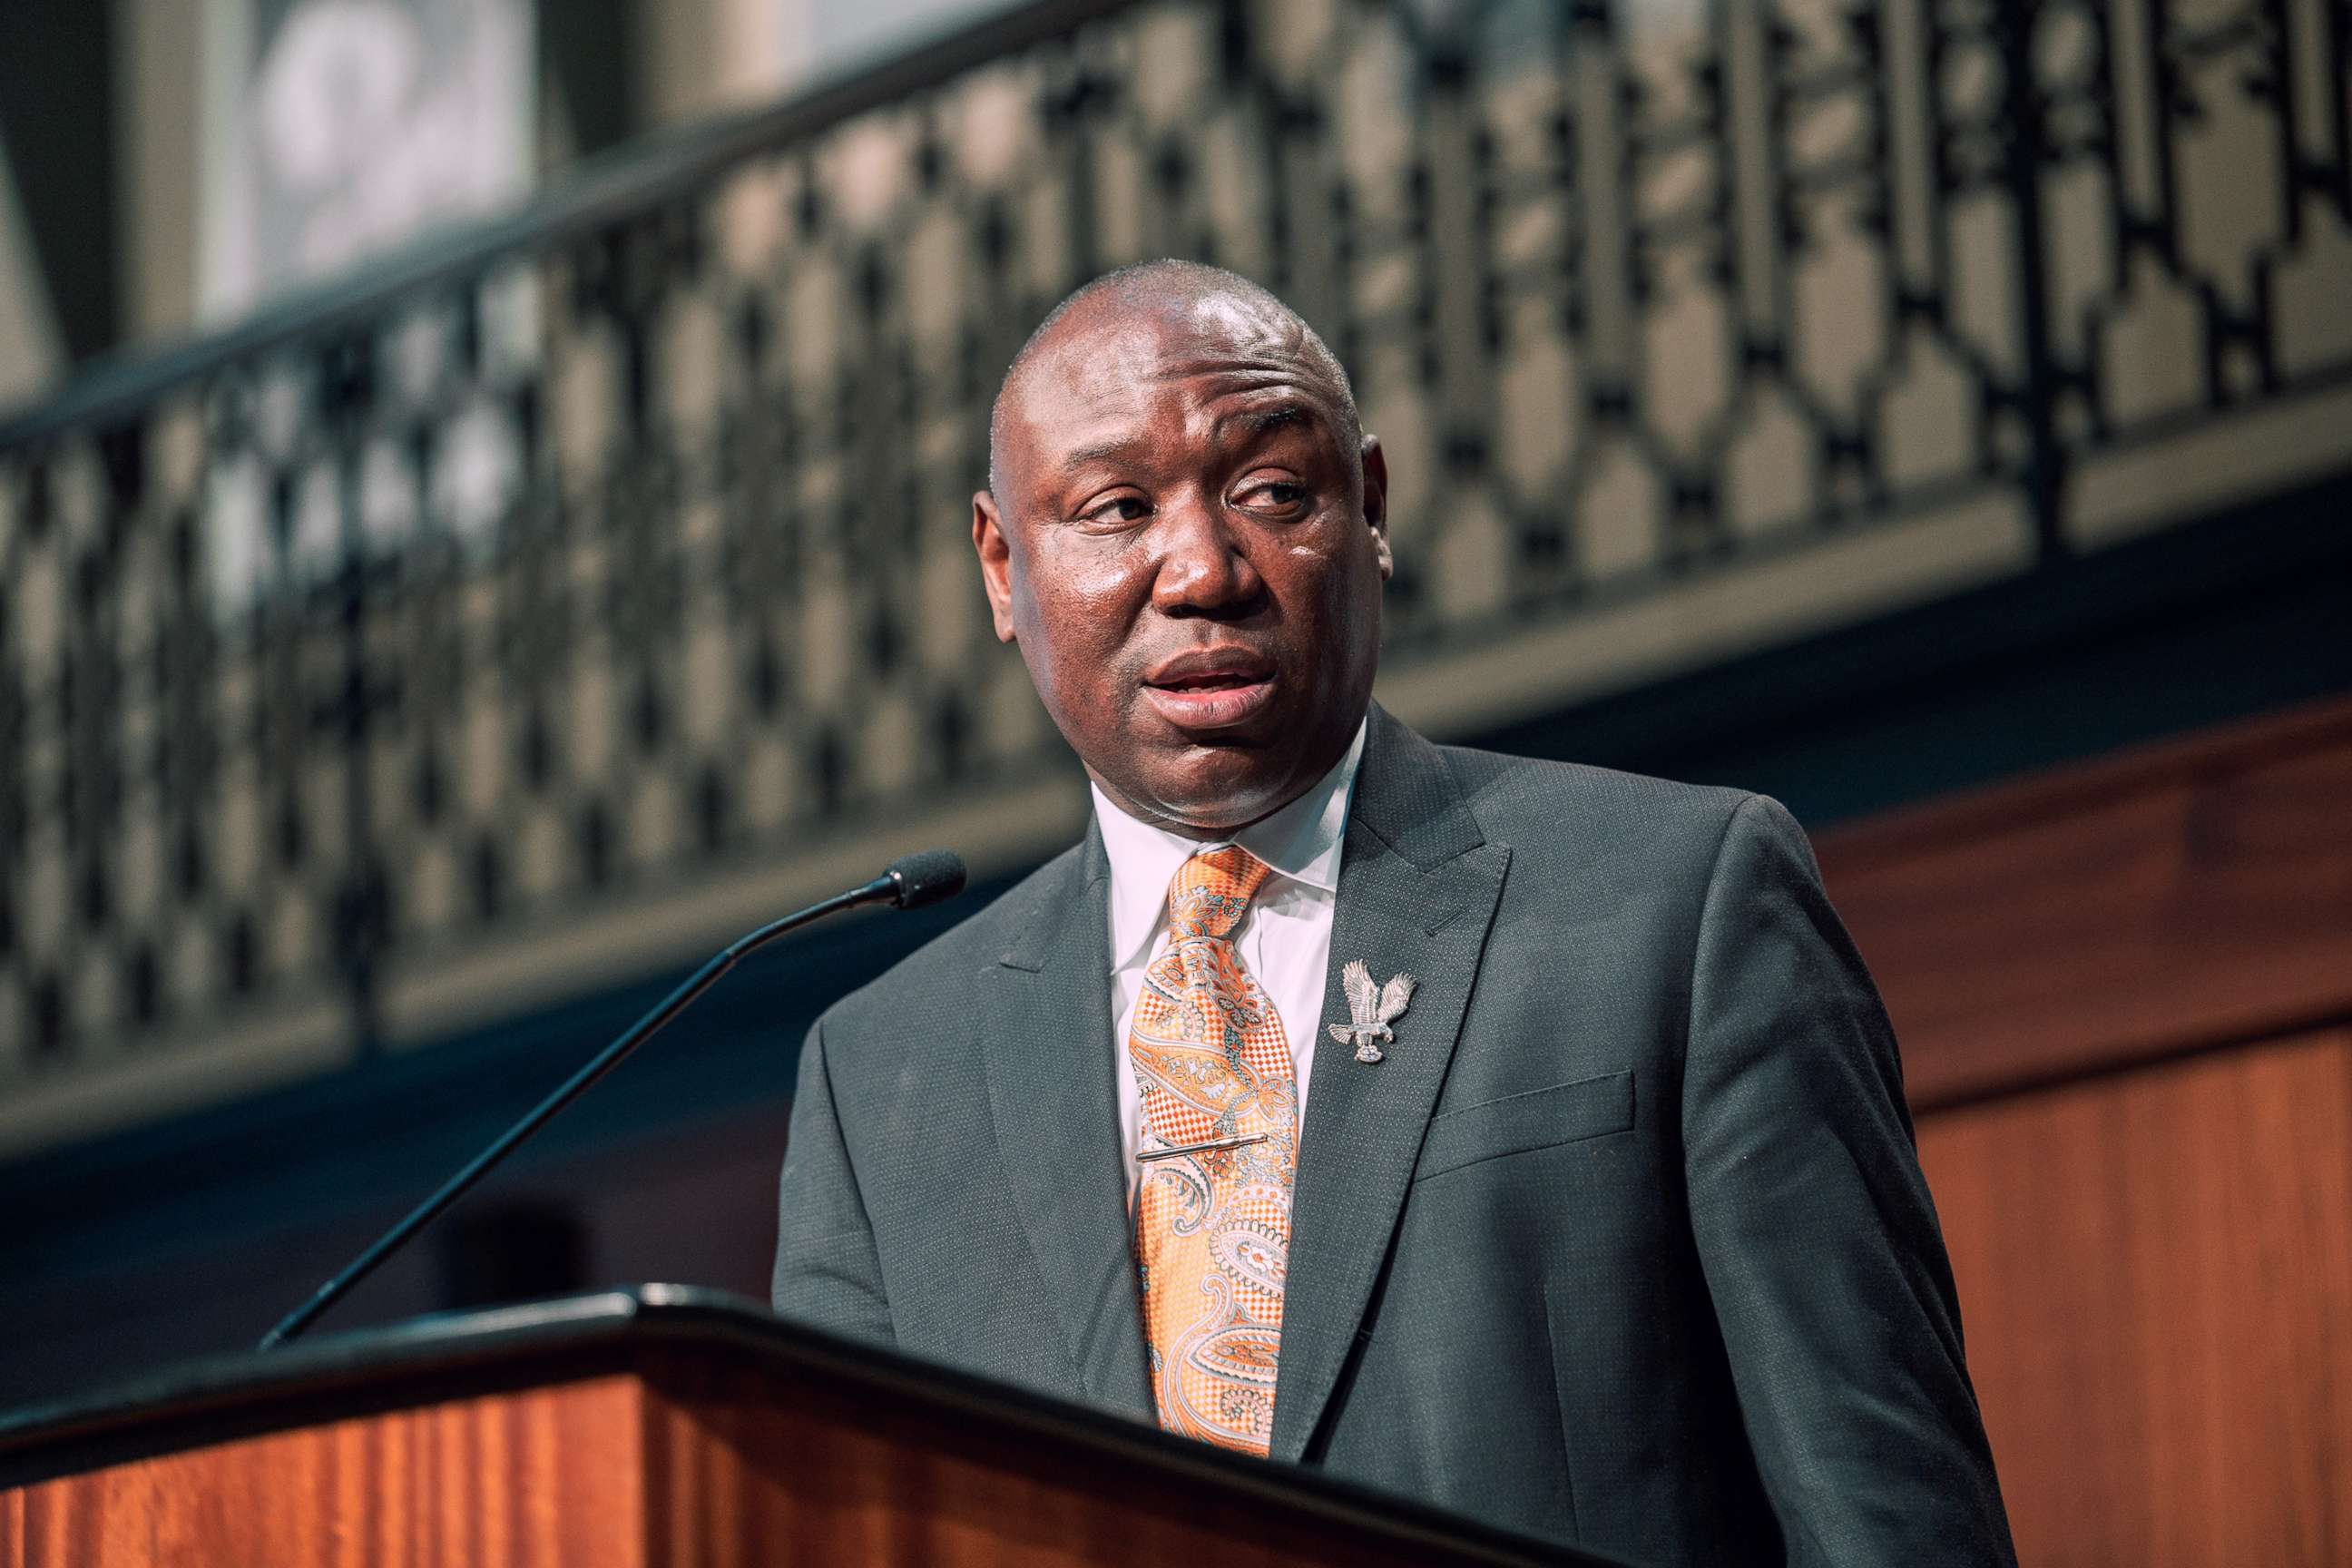 PHOTO: Attorney Ben Crump speaks at a press conference at City Hall on Sept. 15, 2020, in Louisville, Kentucky.